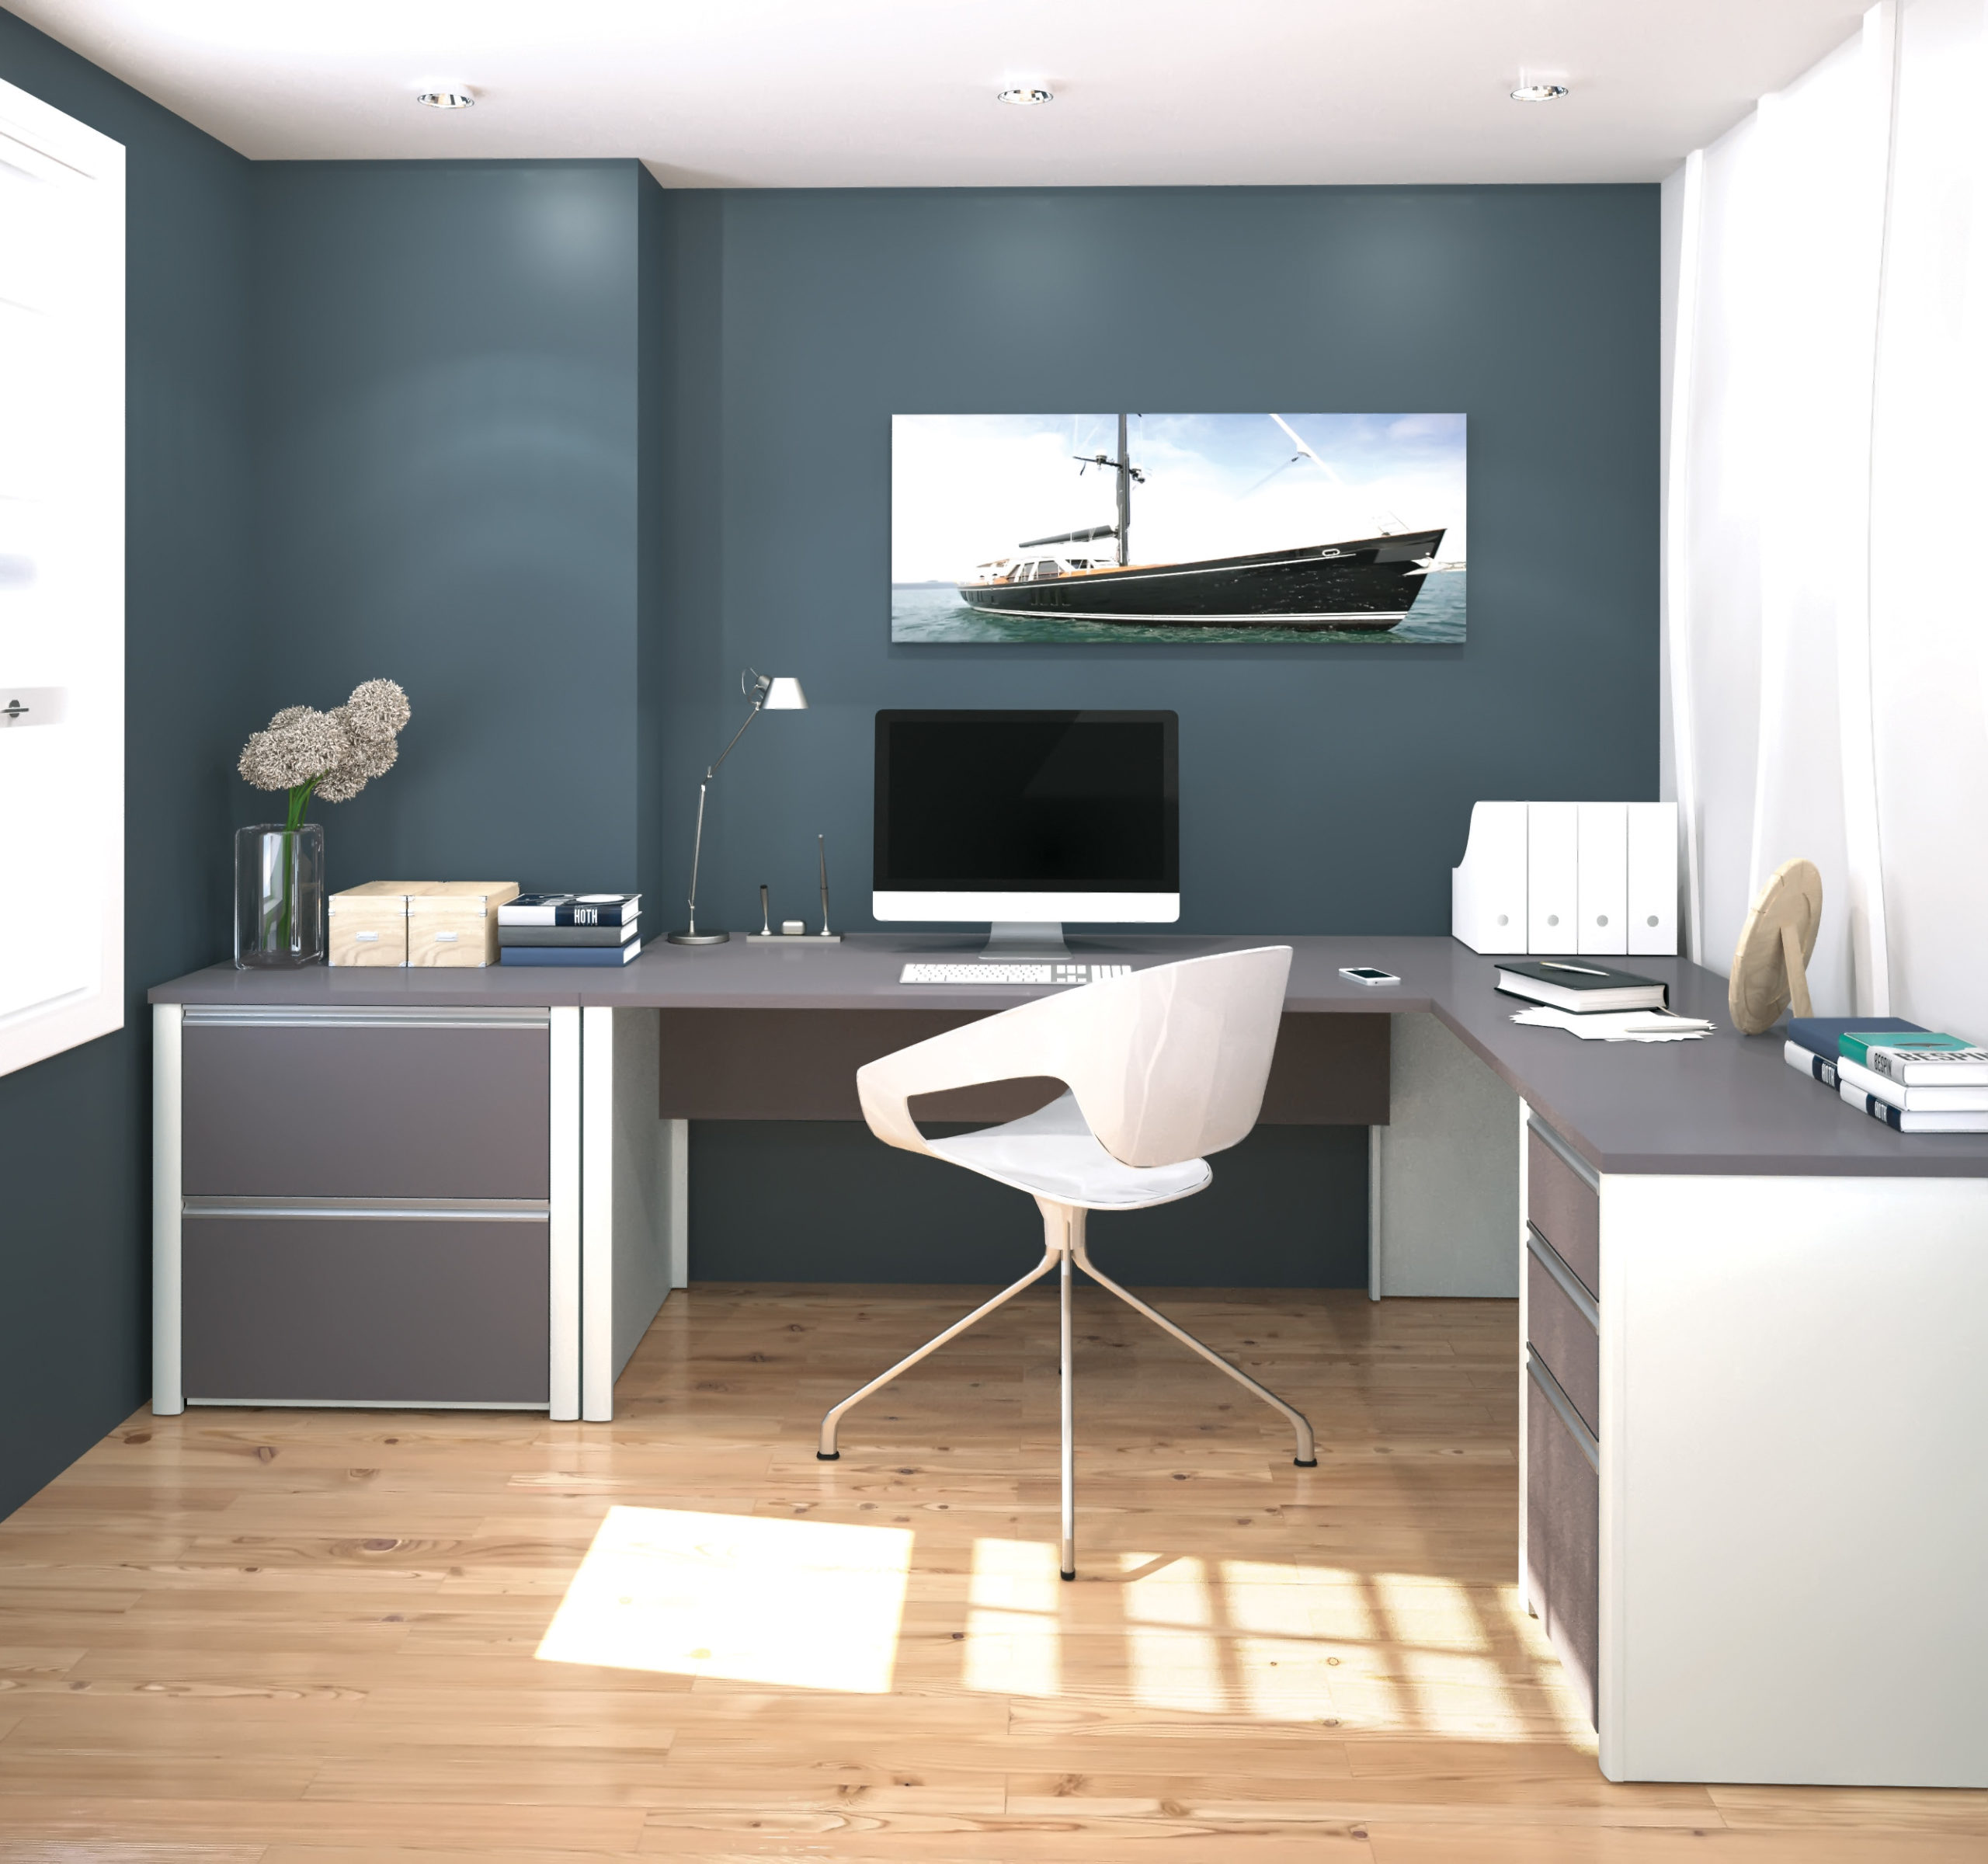 Choosing the Right Colors for Your Office